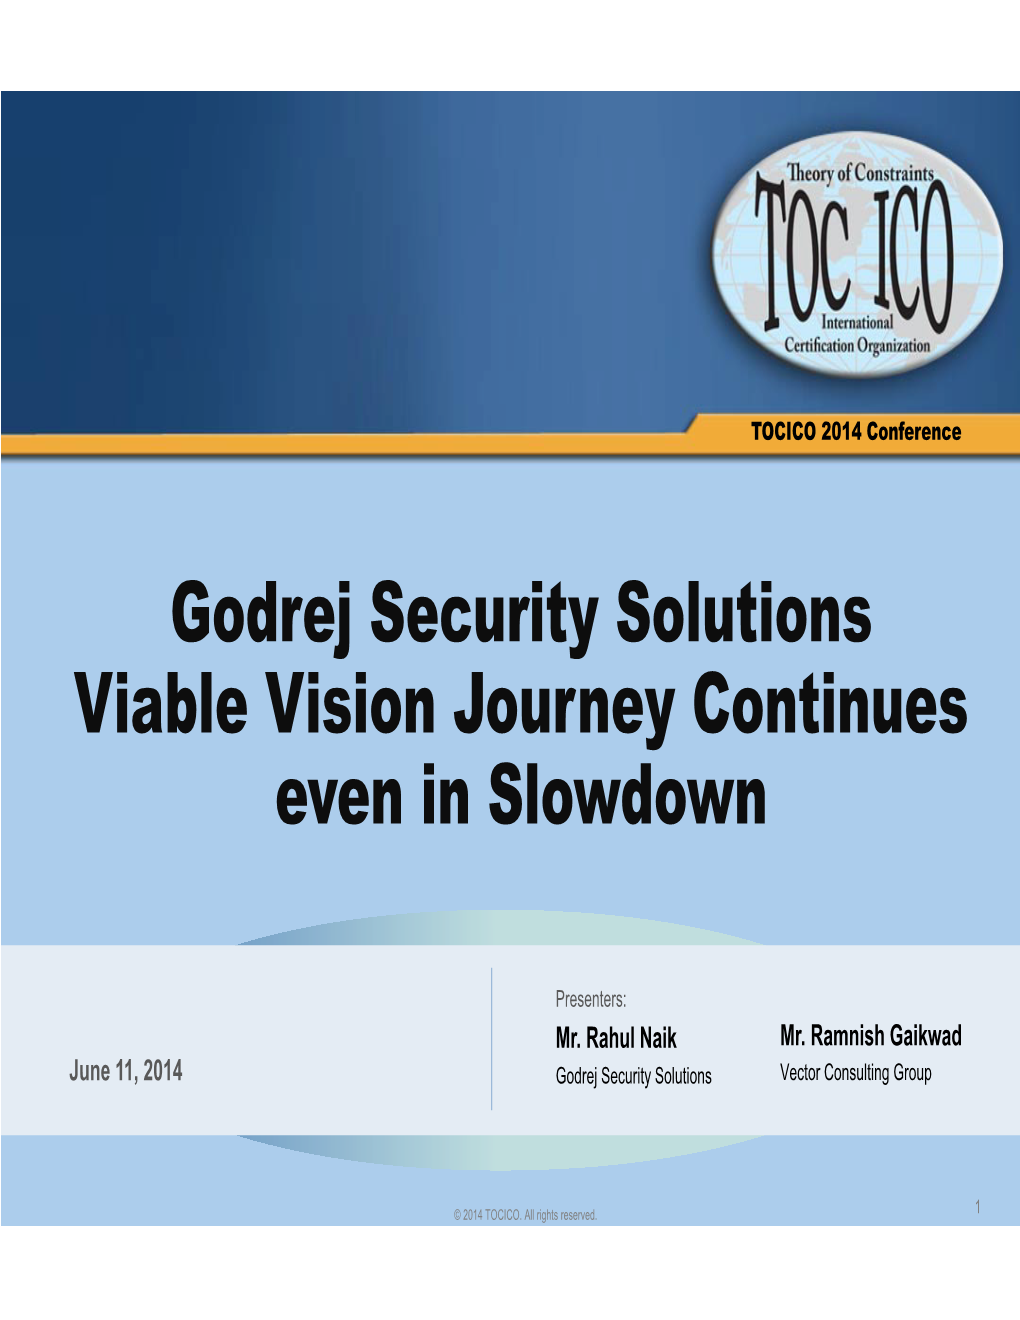 Godrej Security Solutions Viable Vision Journey Continues Even in Slowdown